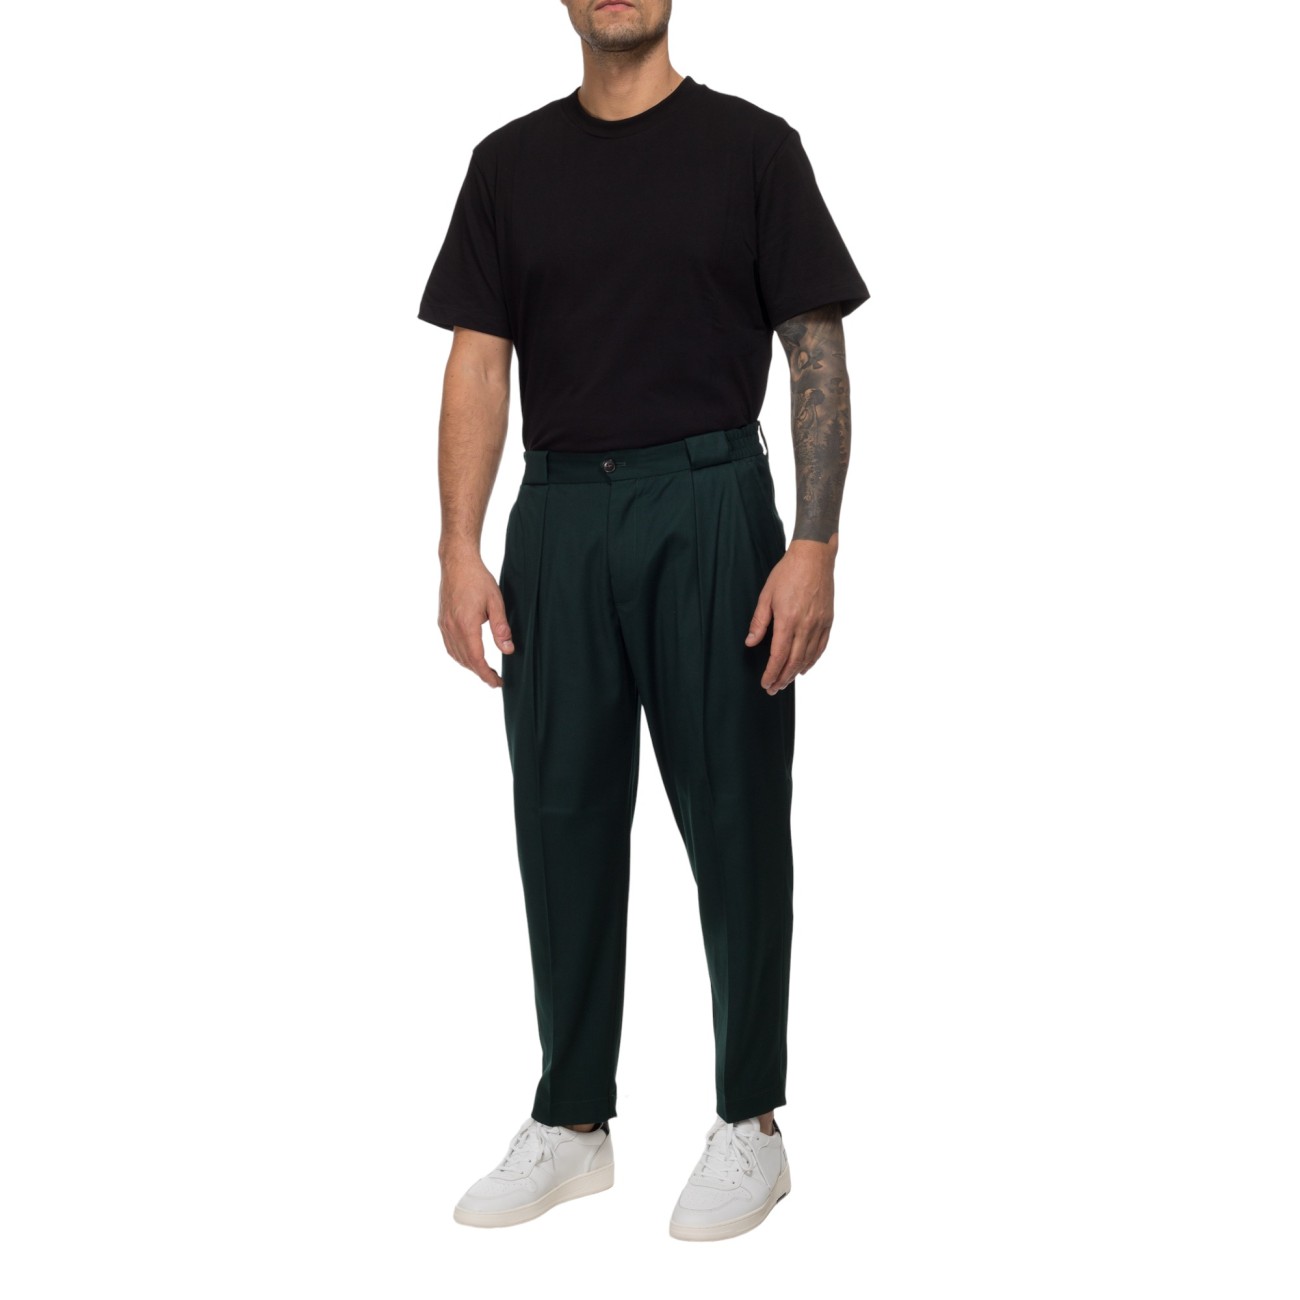 Bottle green chino trousers...